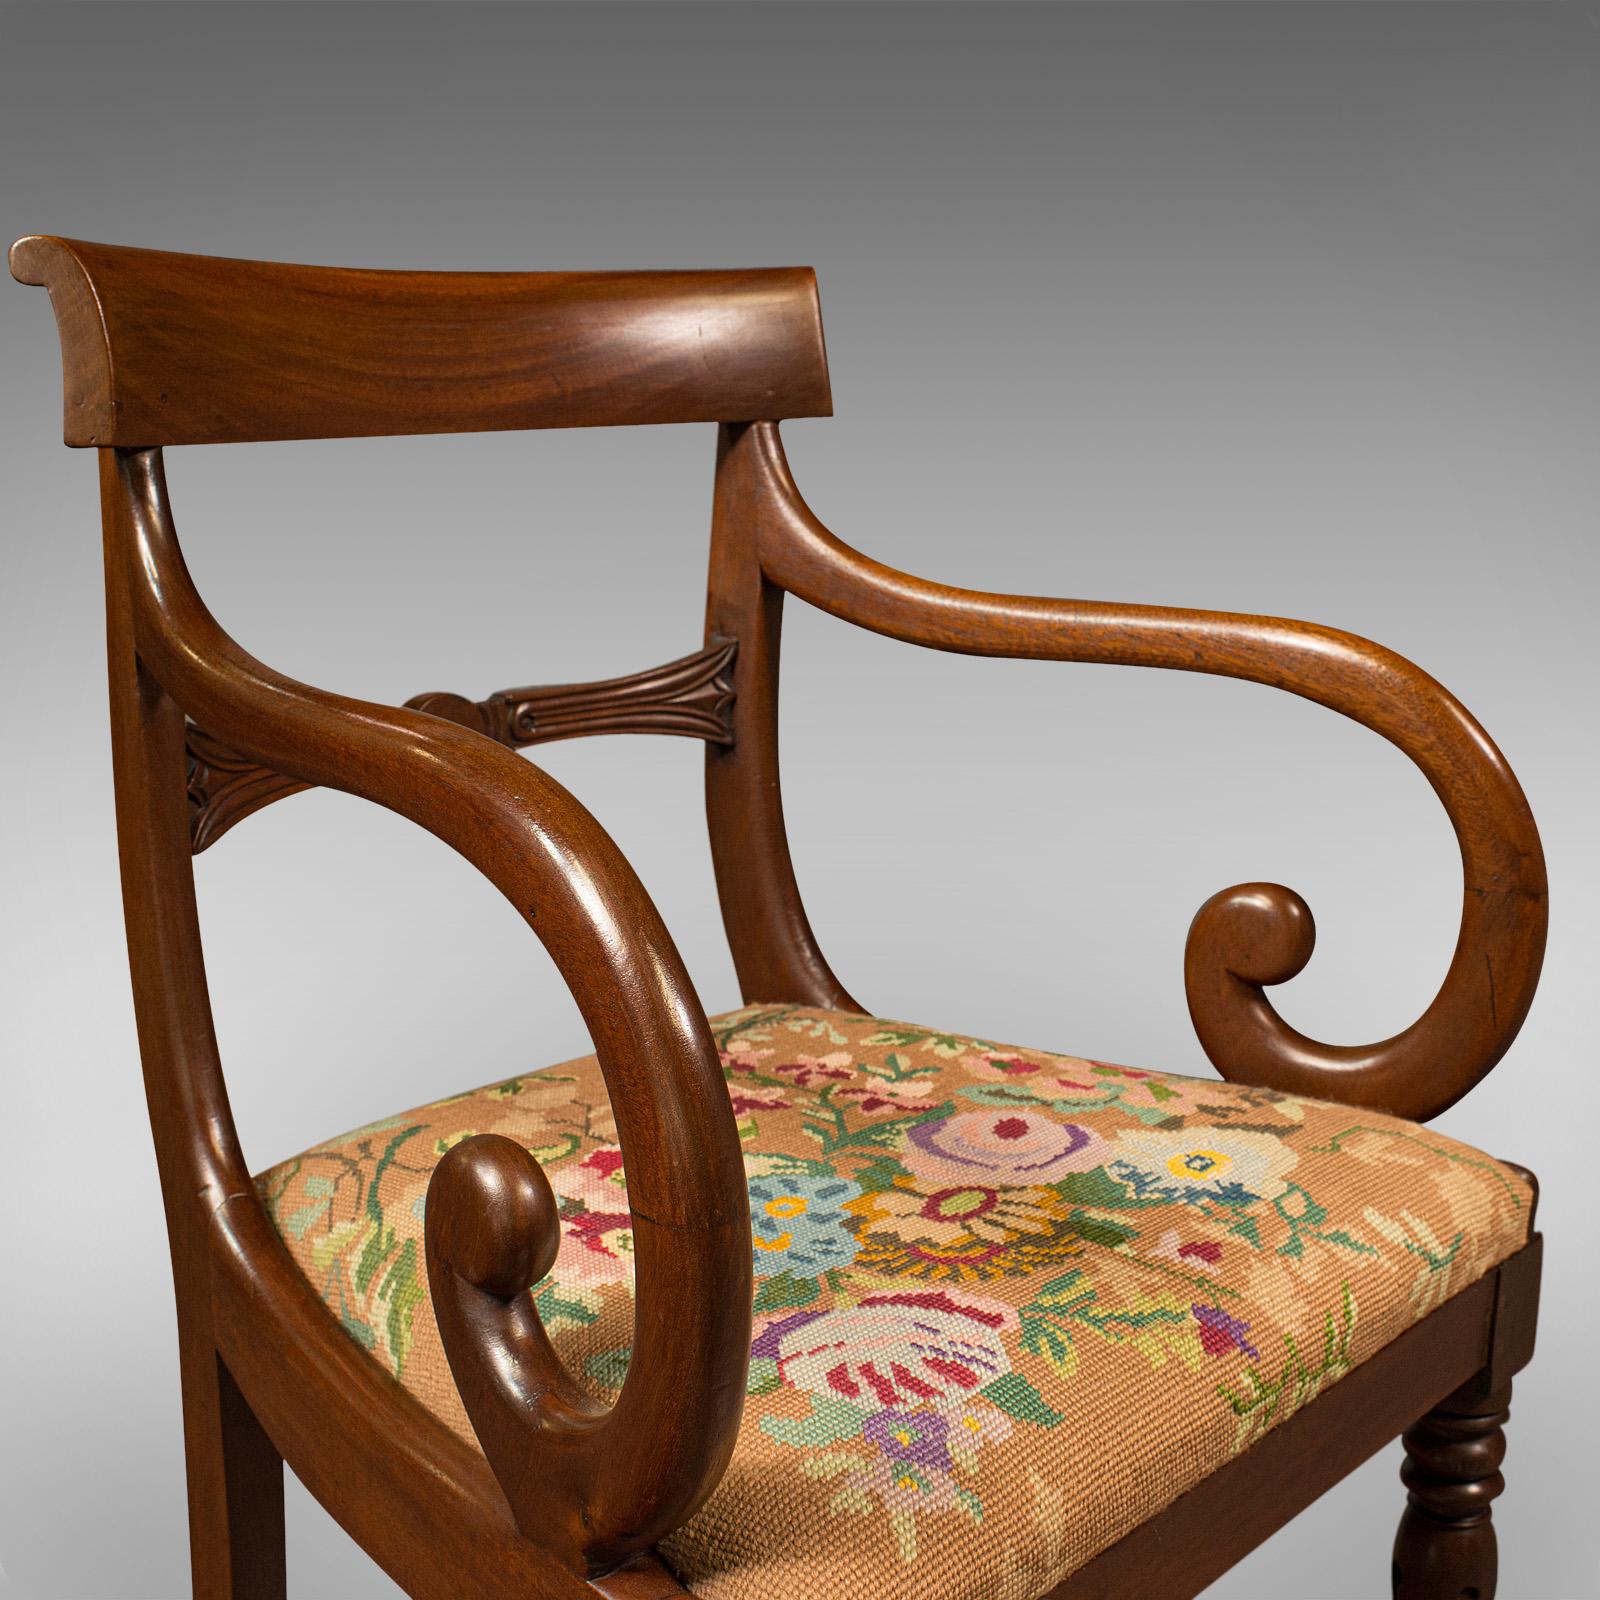 Antique Scroll Arm Chair, English, Armchair, Desk, Needlepoint, Regency, C.1830 For Sale 2